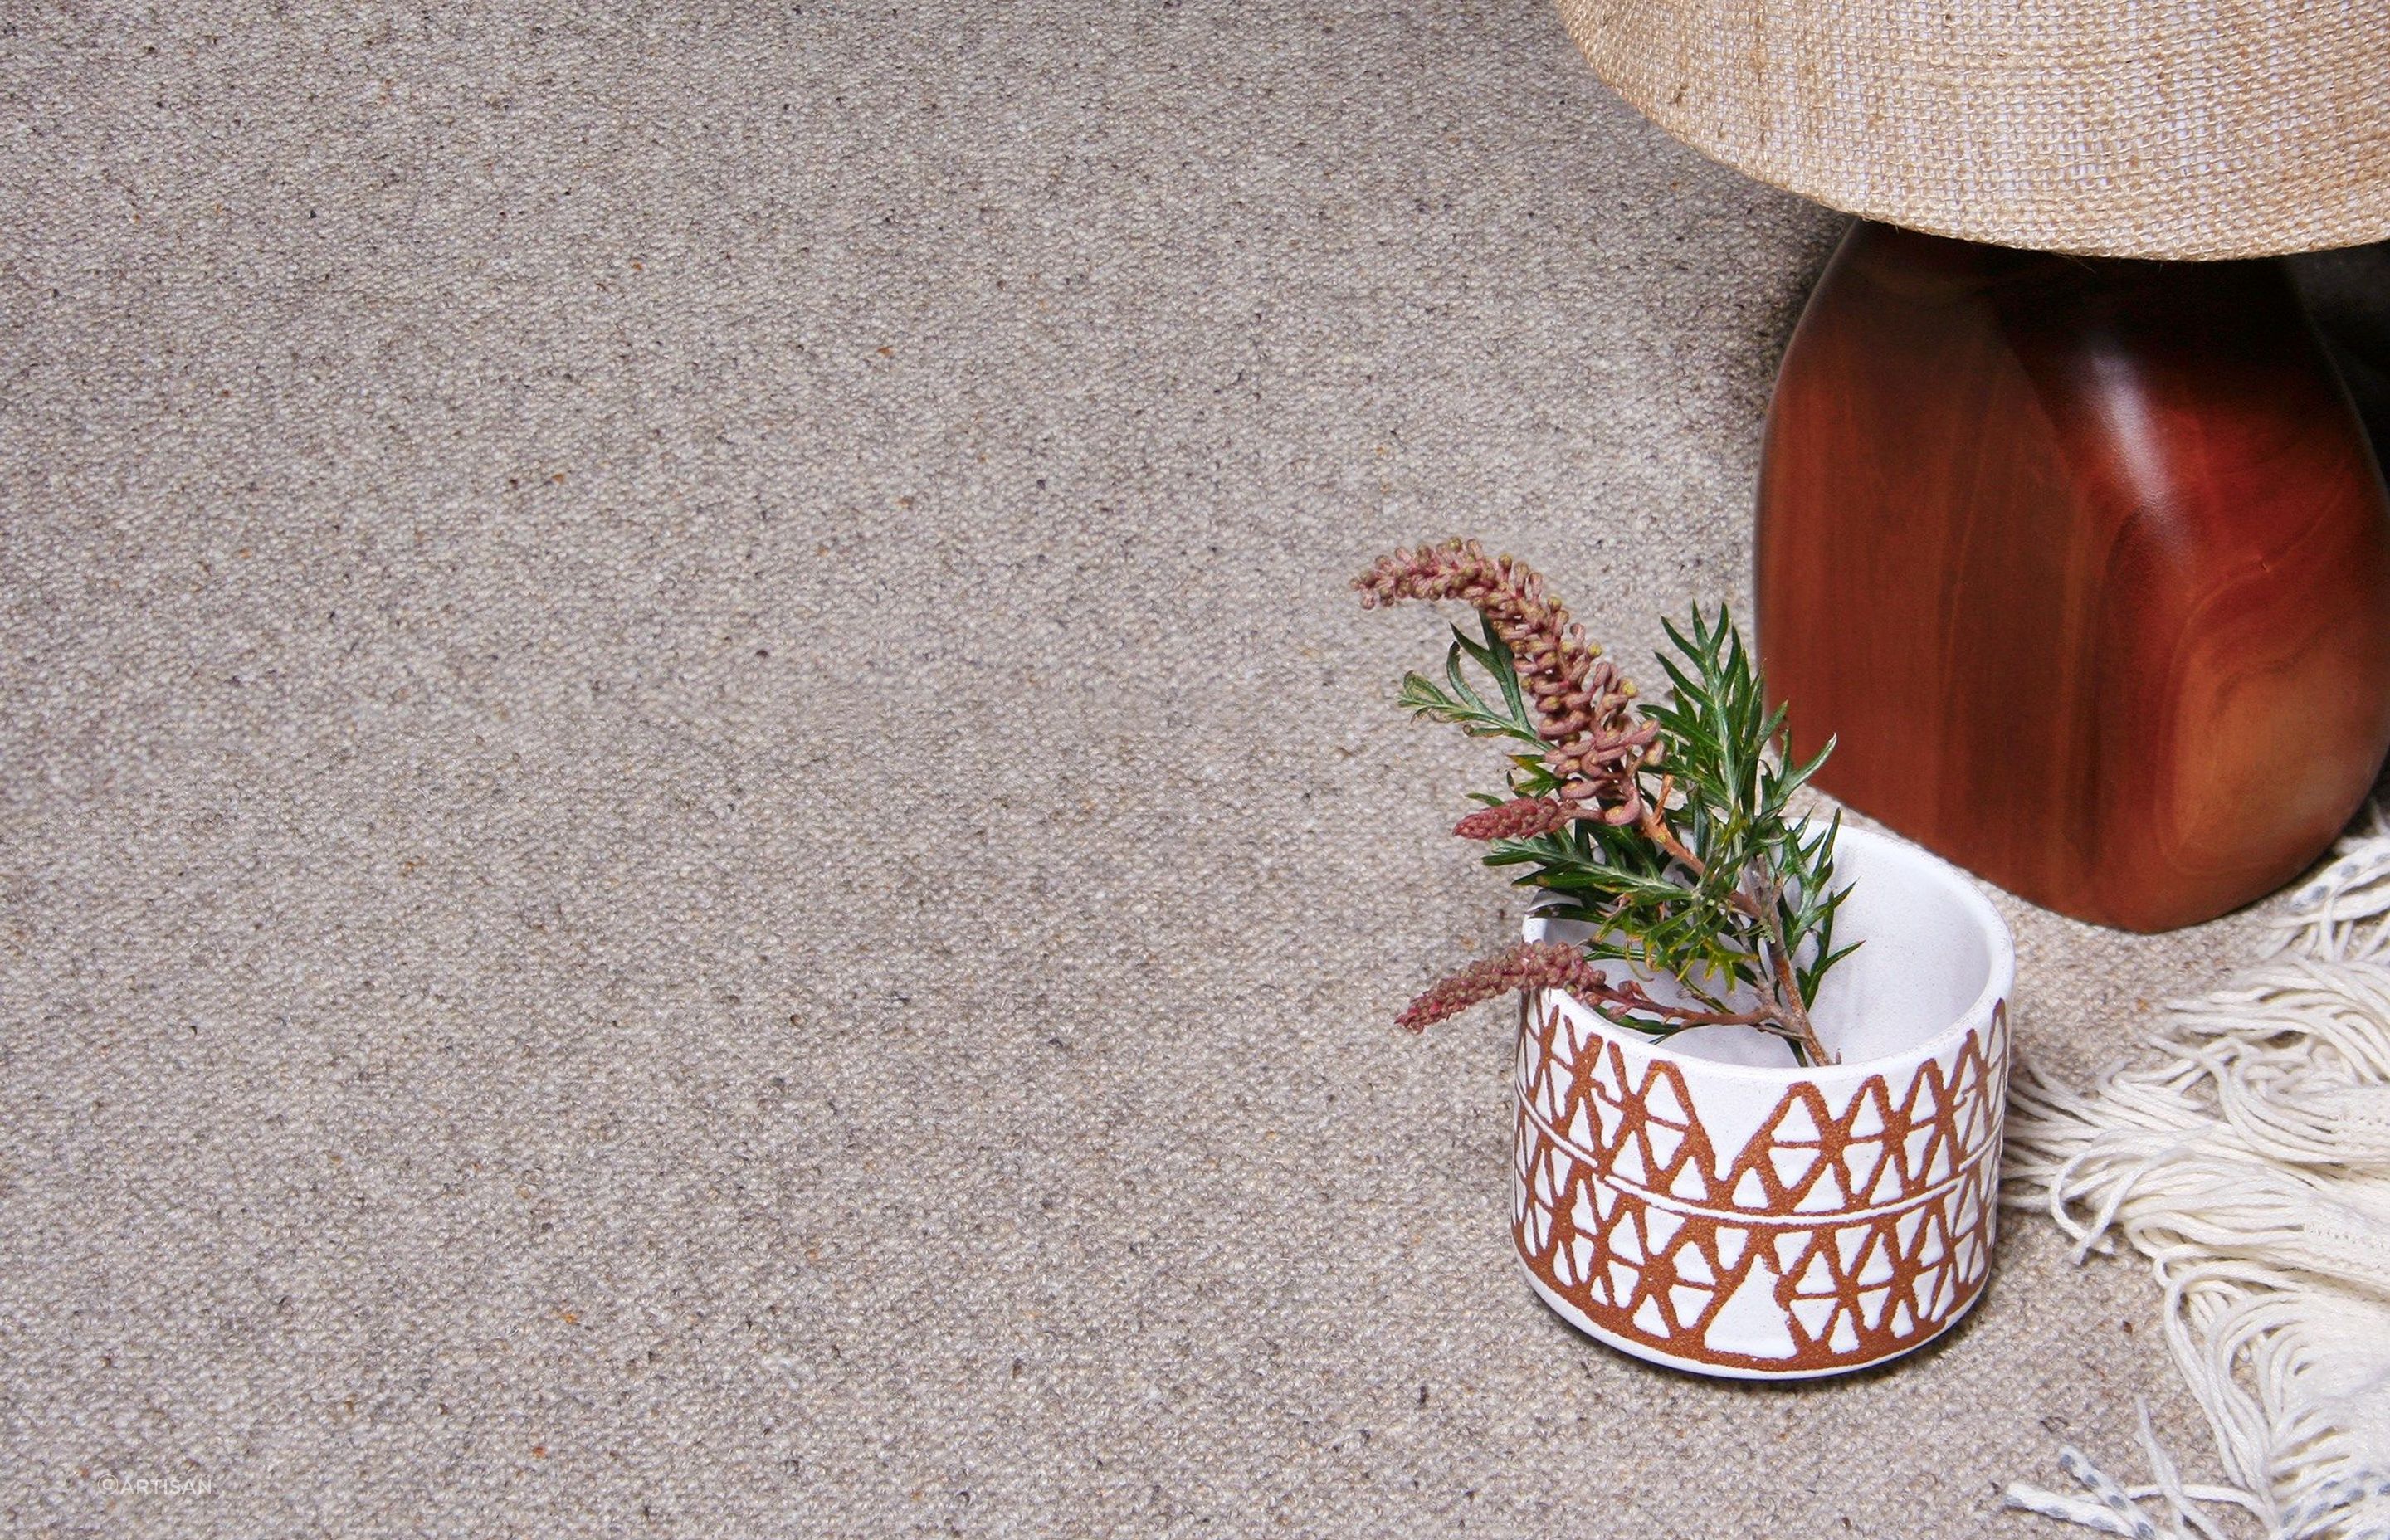 The Casablanca Carpet is a hard-wearing choice with versatile colour choices.